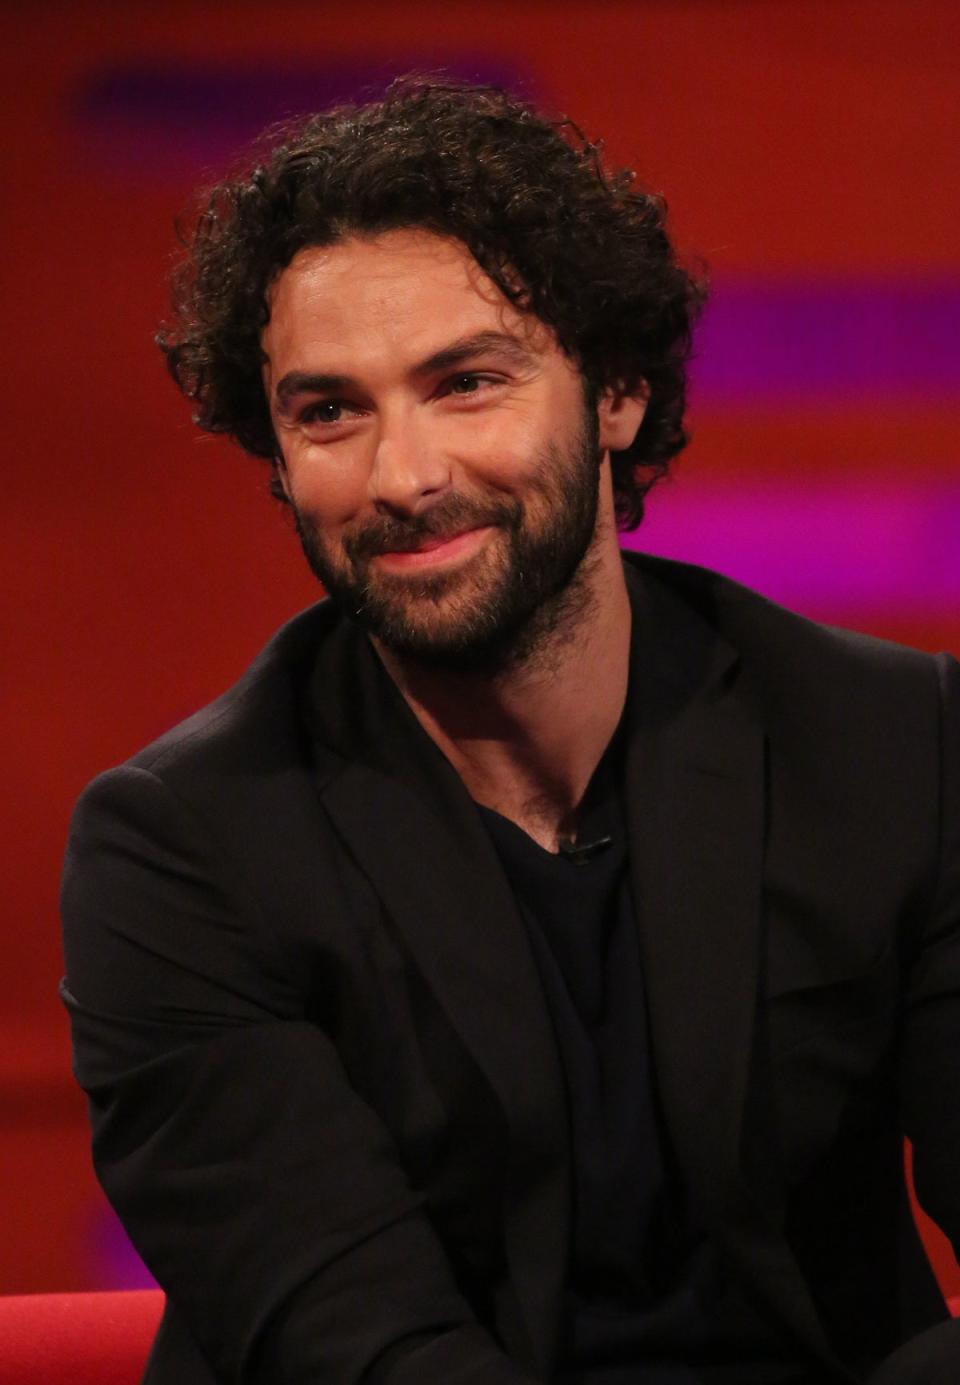 Aidan Turner starred as Poldark in the popular BBC One drama between 2015 and 2019 (Isabel Infantes/PA) (PA Archive)